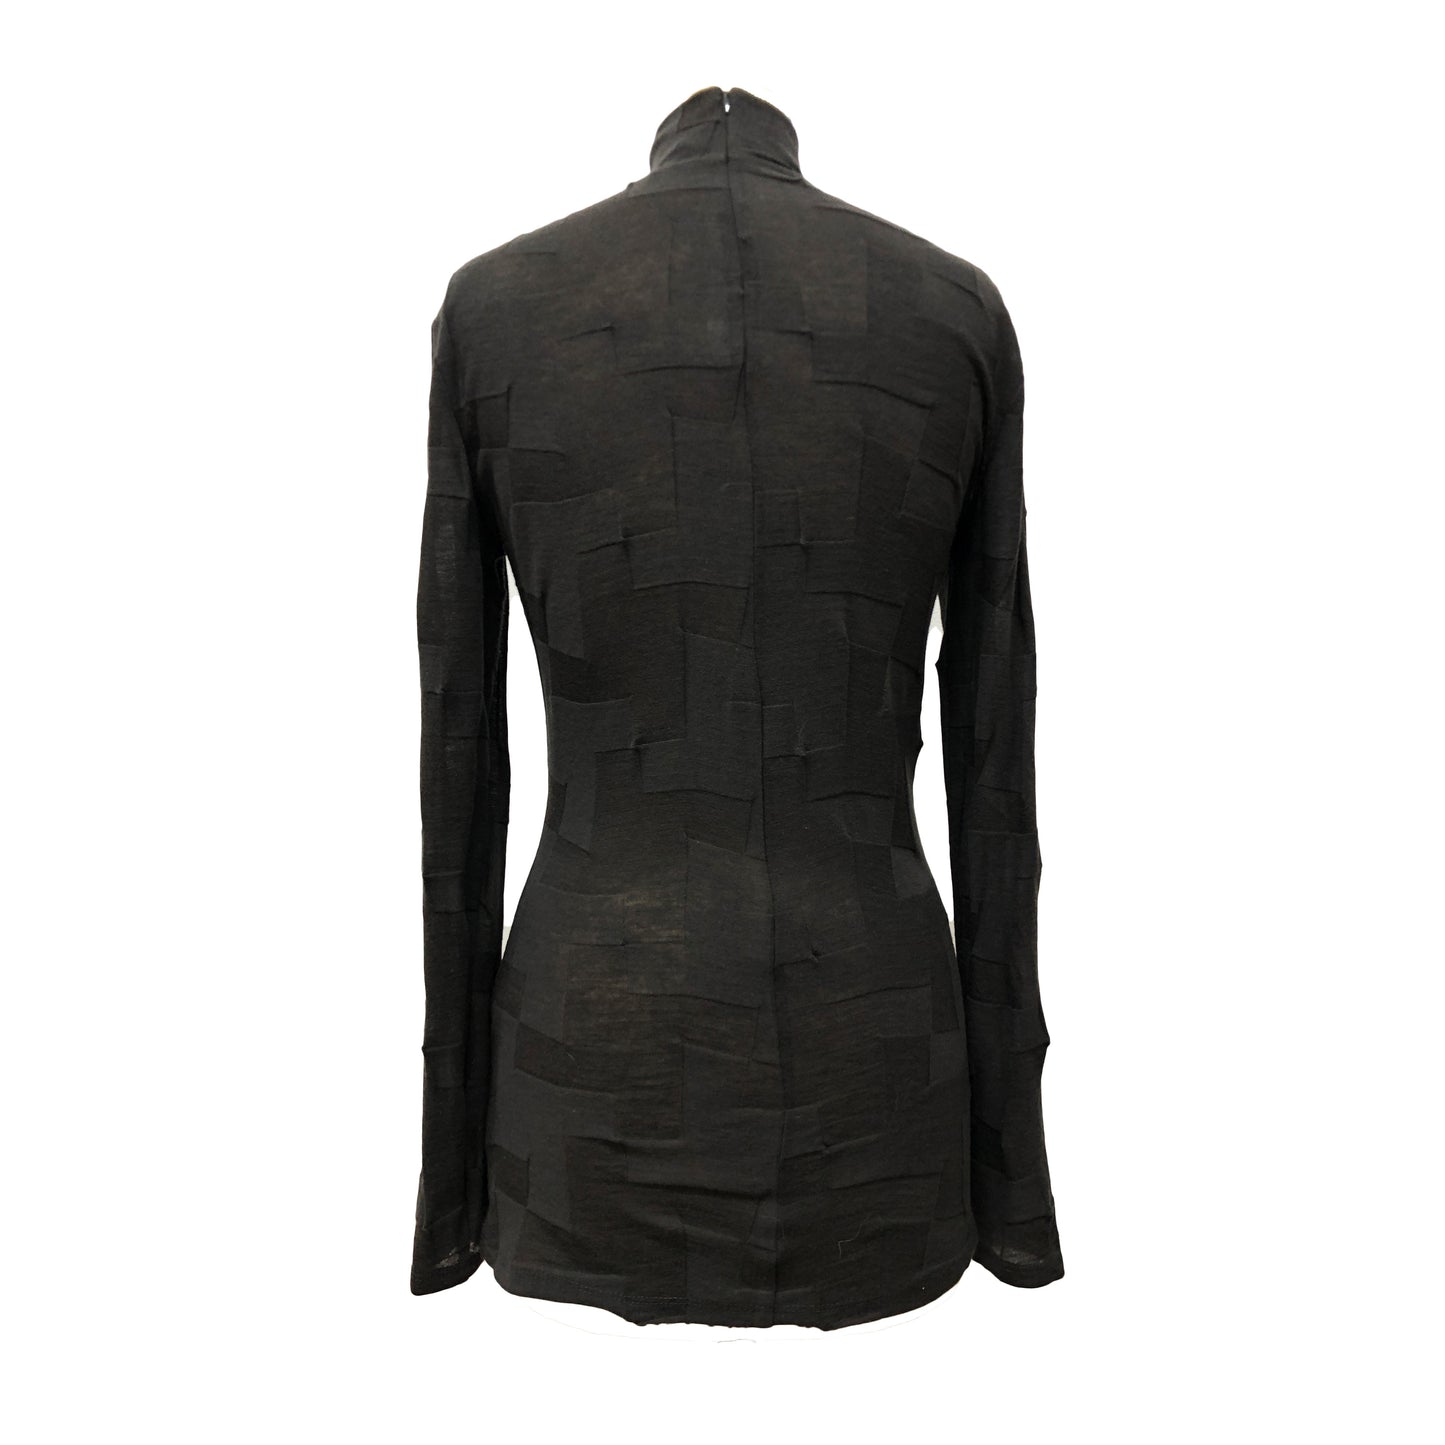 Back of black wool and elastane blend turtleneck with geometric patterns